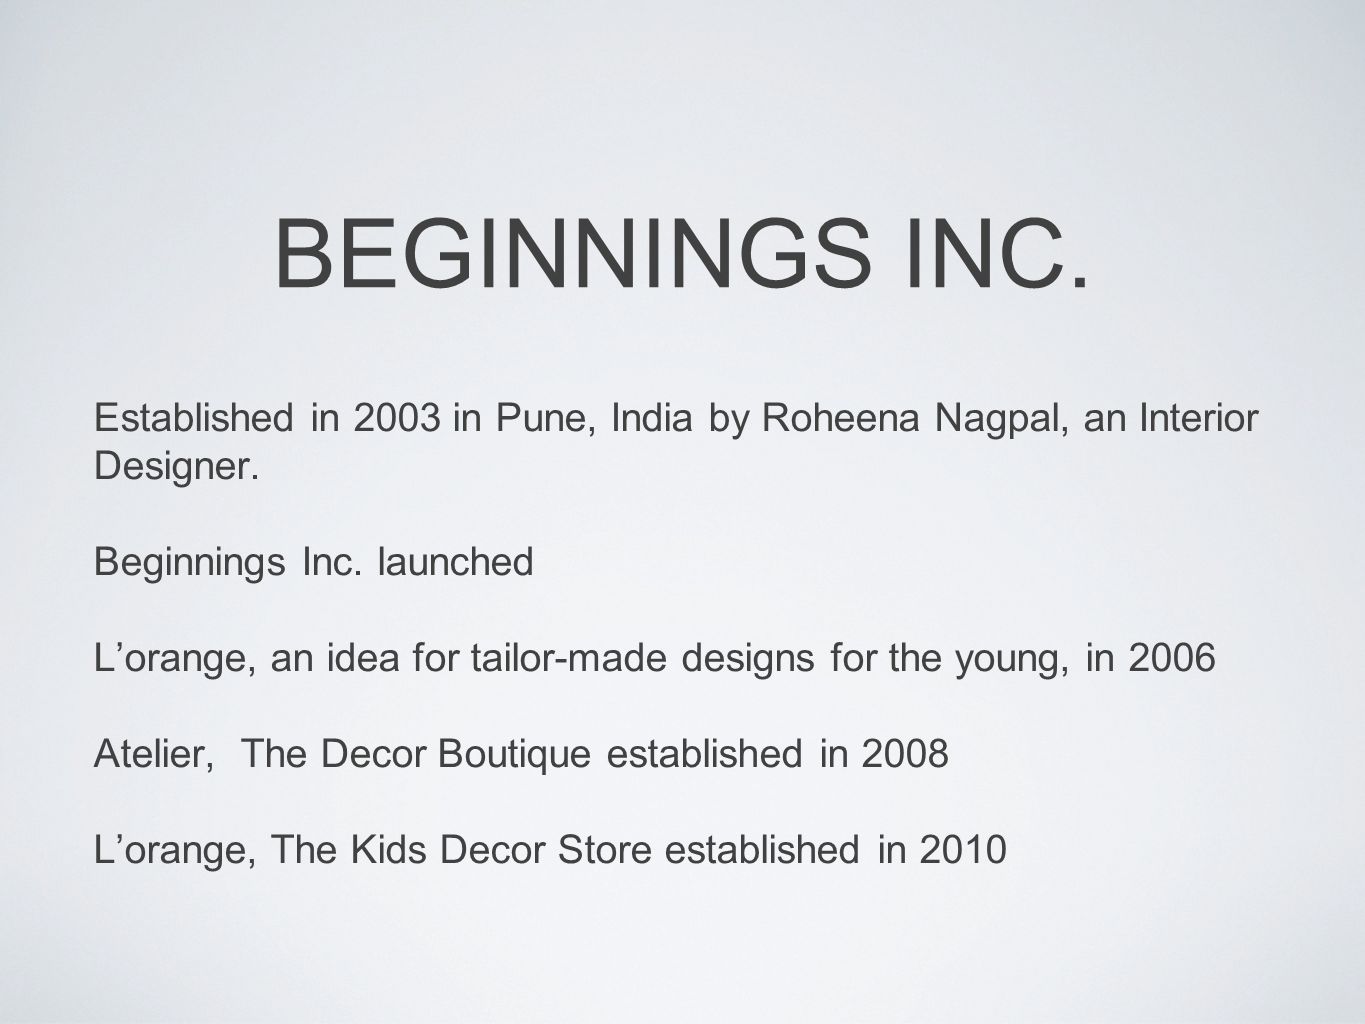 Established in 2003 in Pune, India by Roheena Nagpal, an Interior Designer.